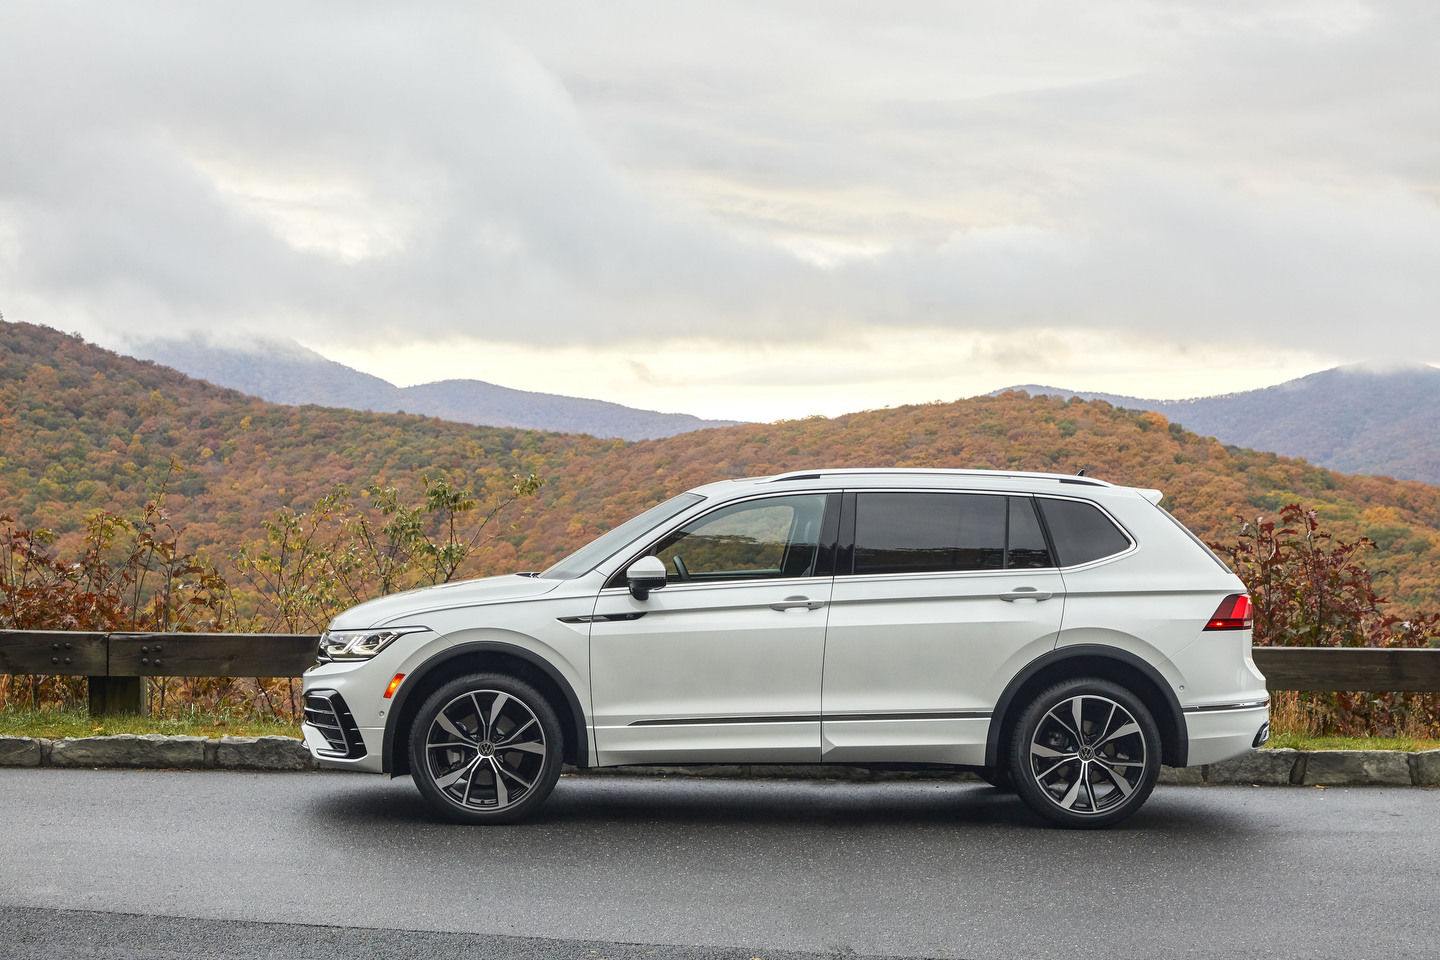 The 2023 Volkswagen Tiguan has features you don’t find in many other SUVs